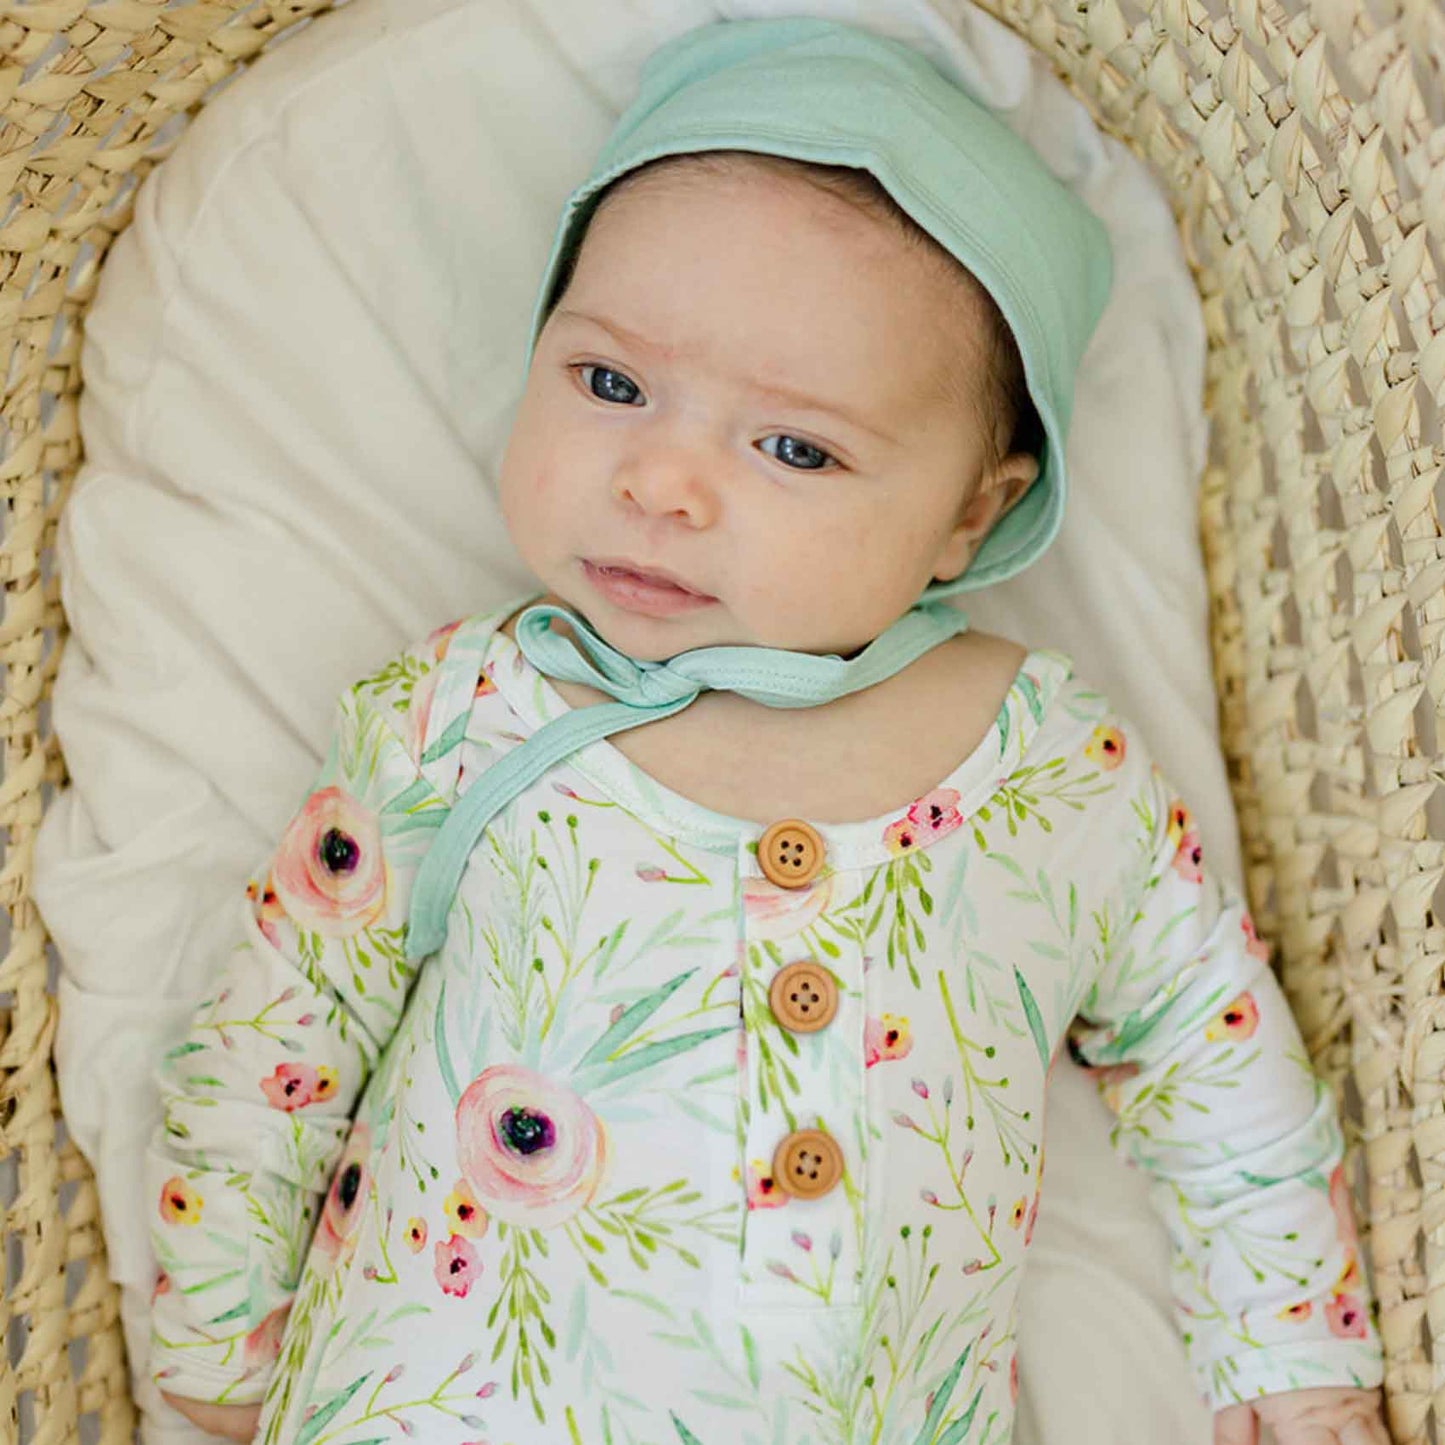 floral baby gown, knotted infant gown, coming home outfit, hospital photo props, baby bonnet mint